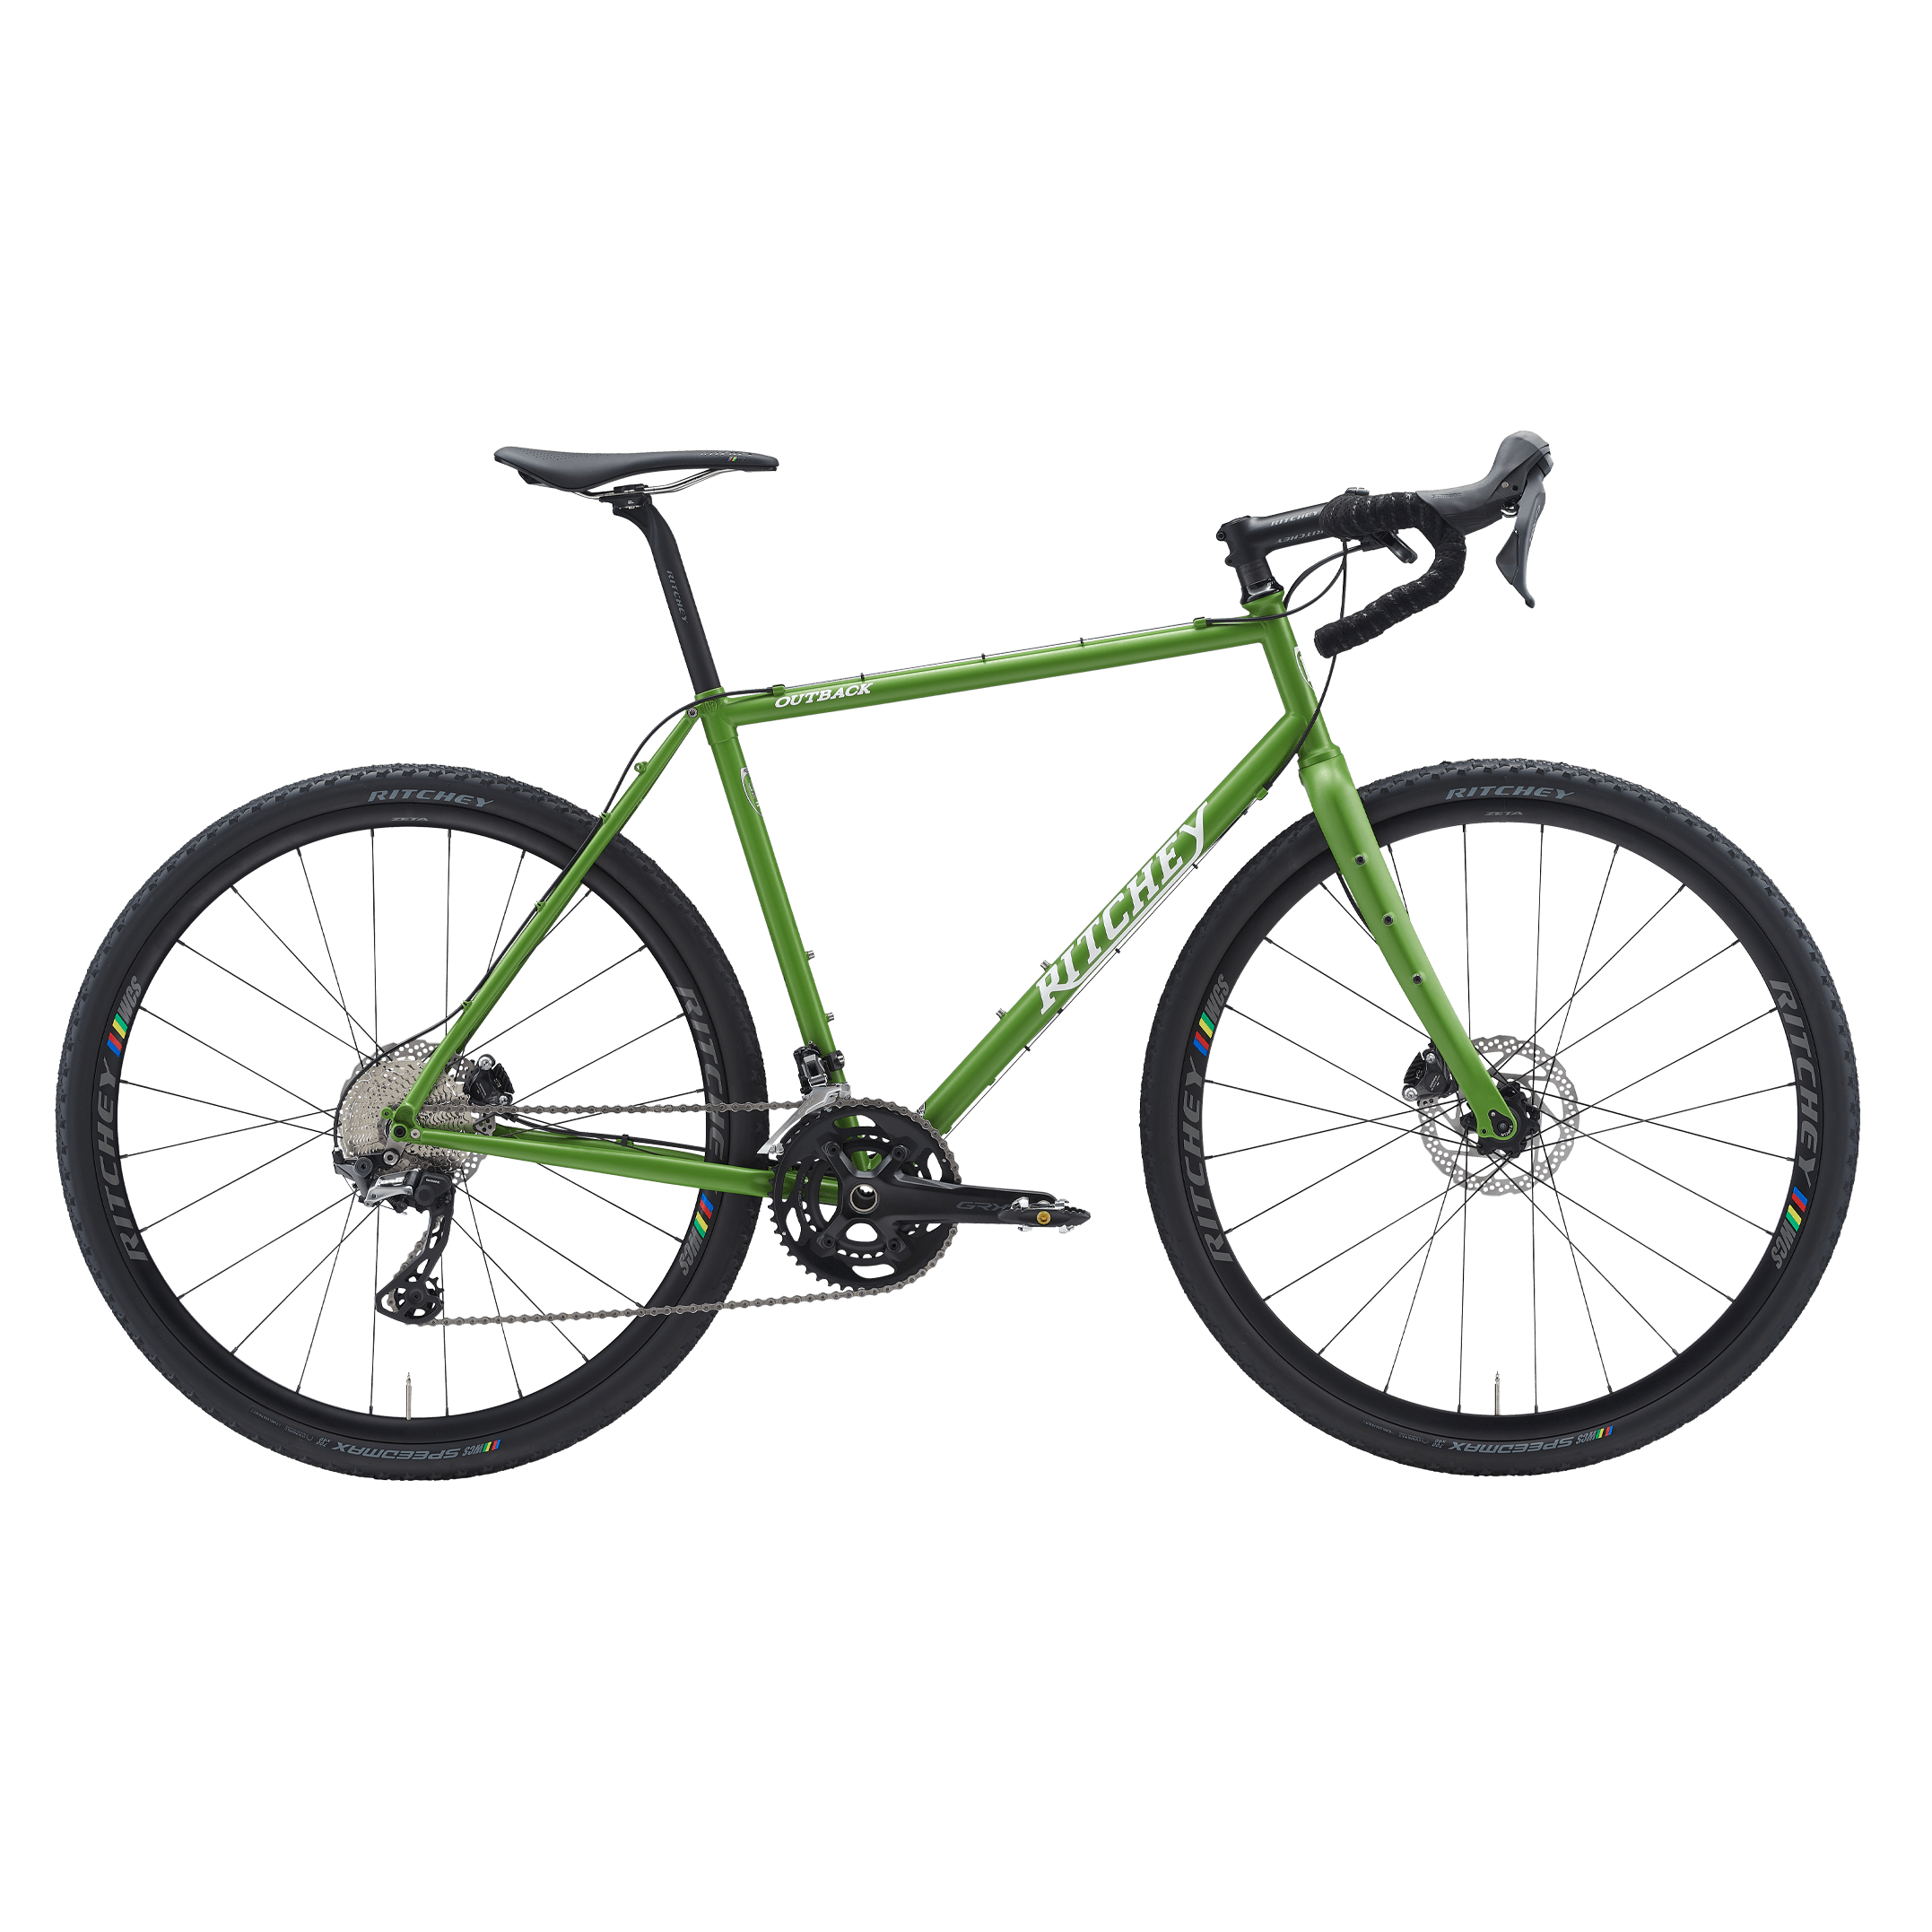 RITCHEY Outback Frame Set